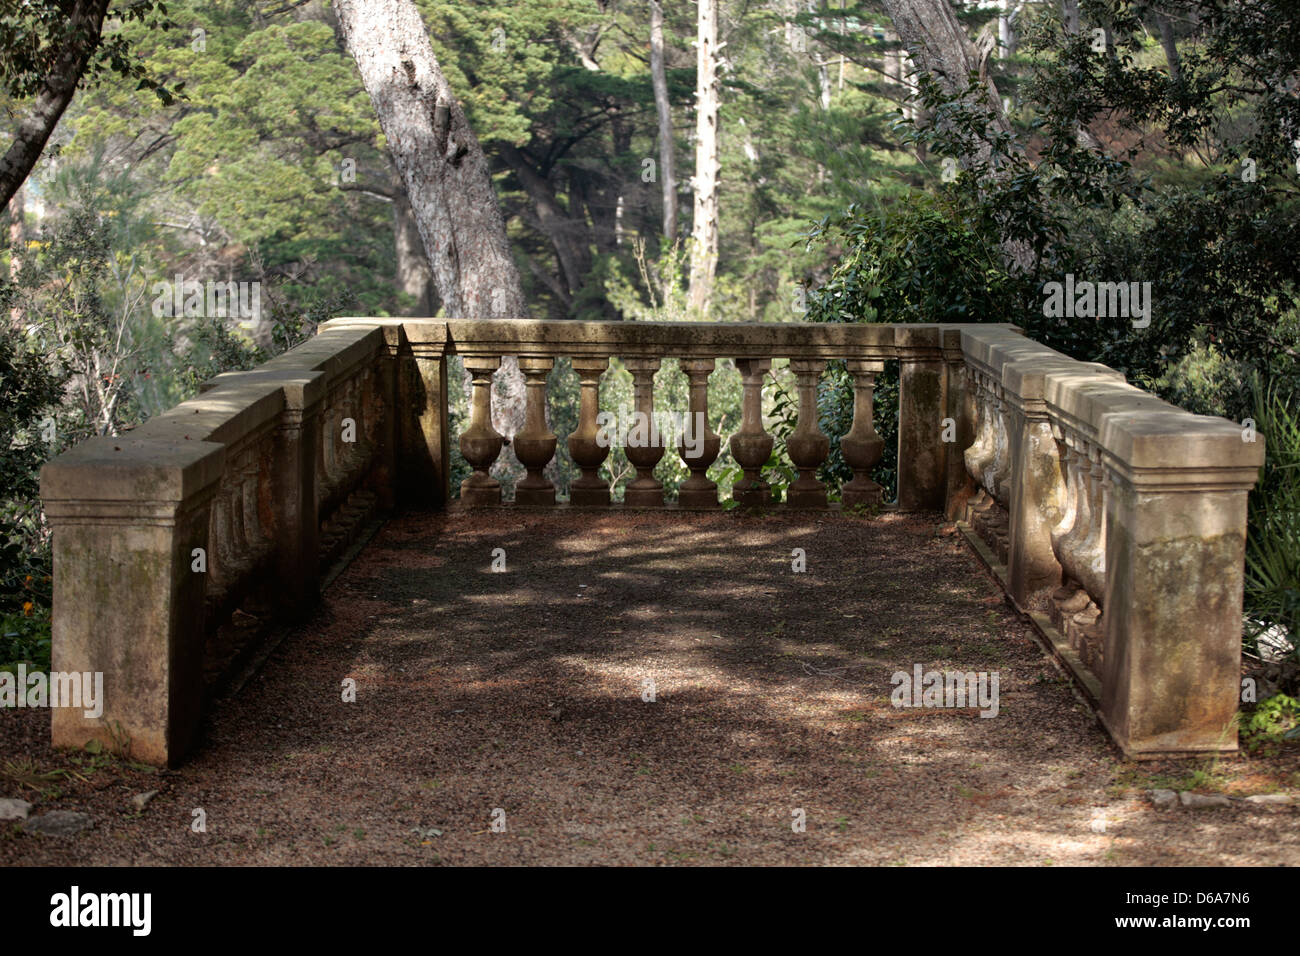 Classic stone balustrade with trees in the background Stock Photo